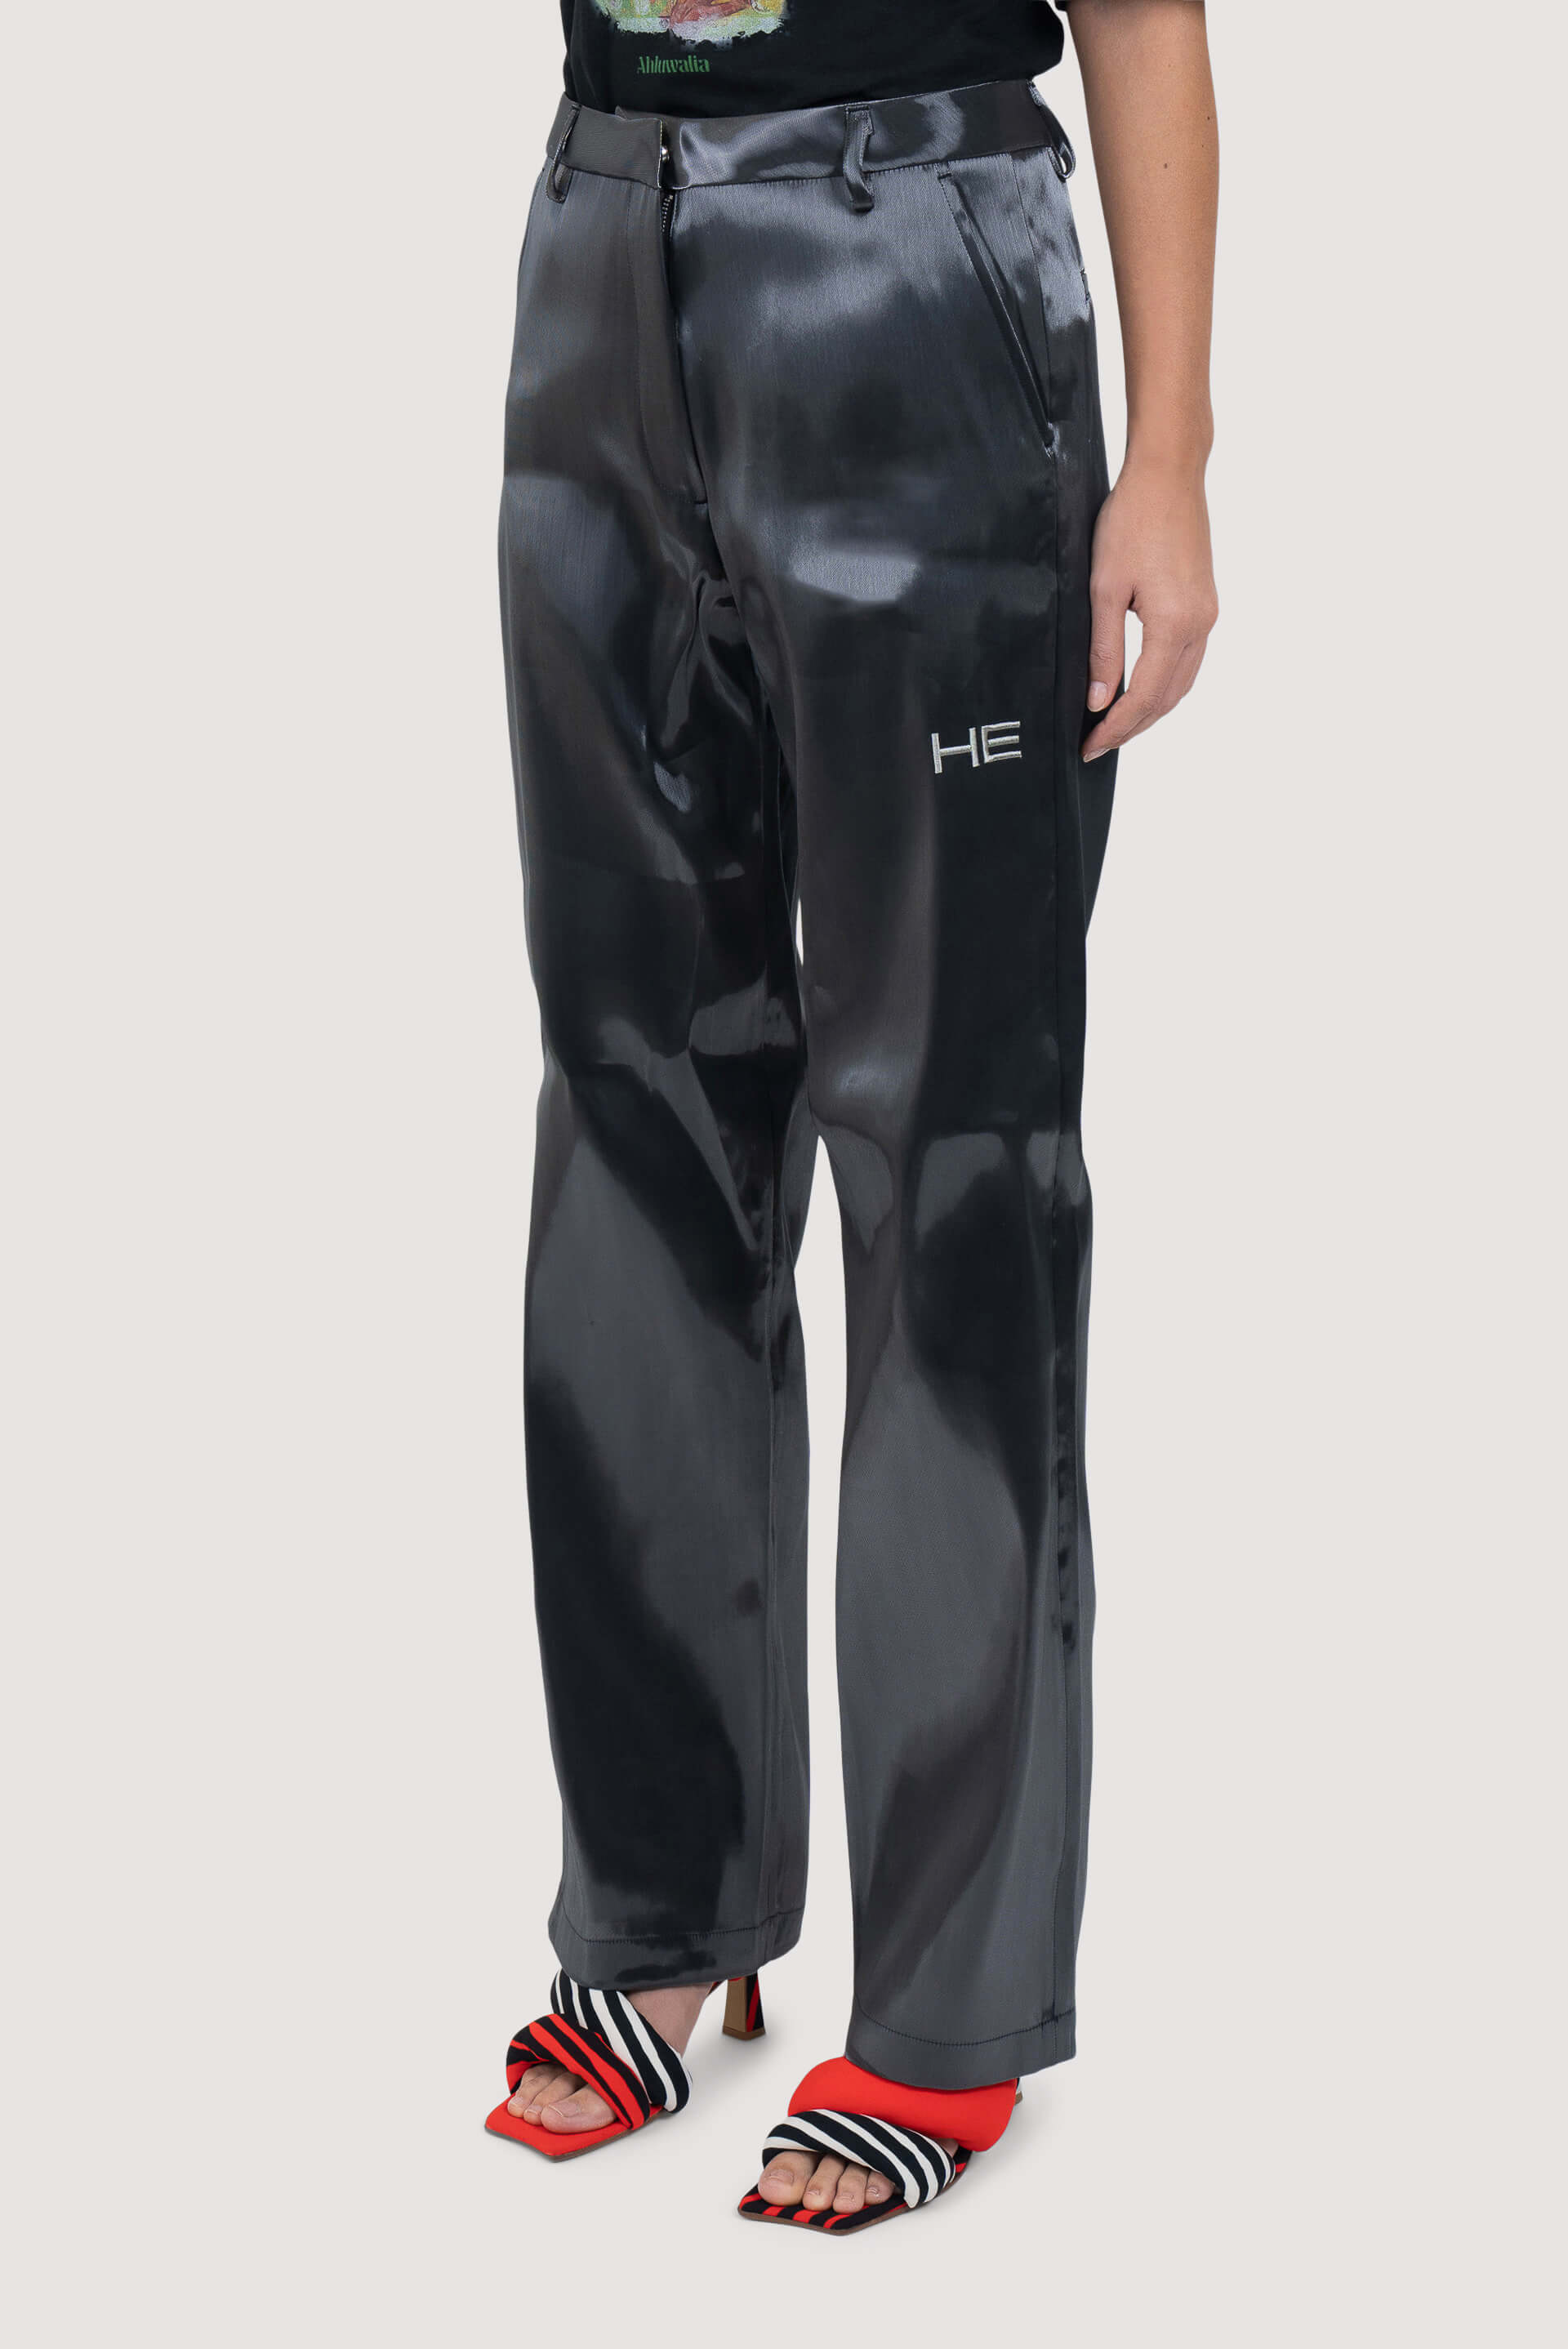 Heliot Emil Liquid Metal Fabric Tailored Trousers - Fabric of Society